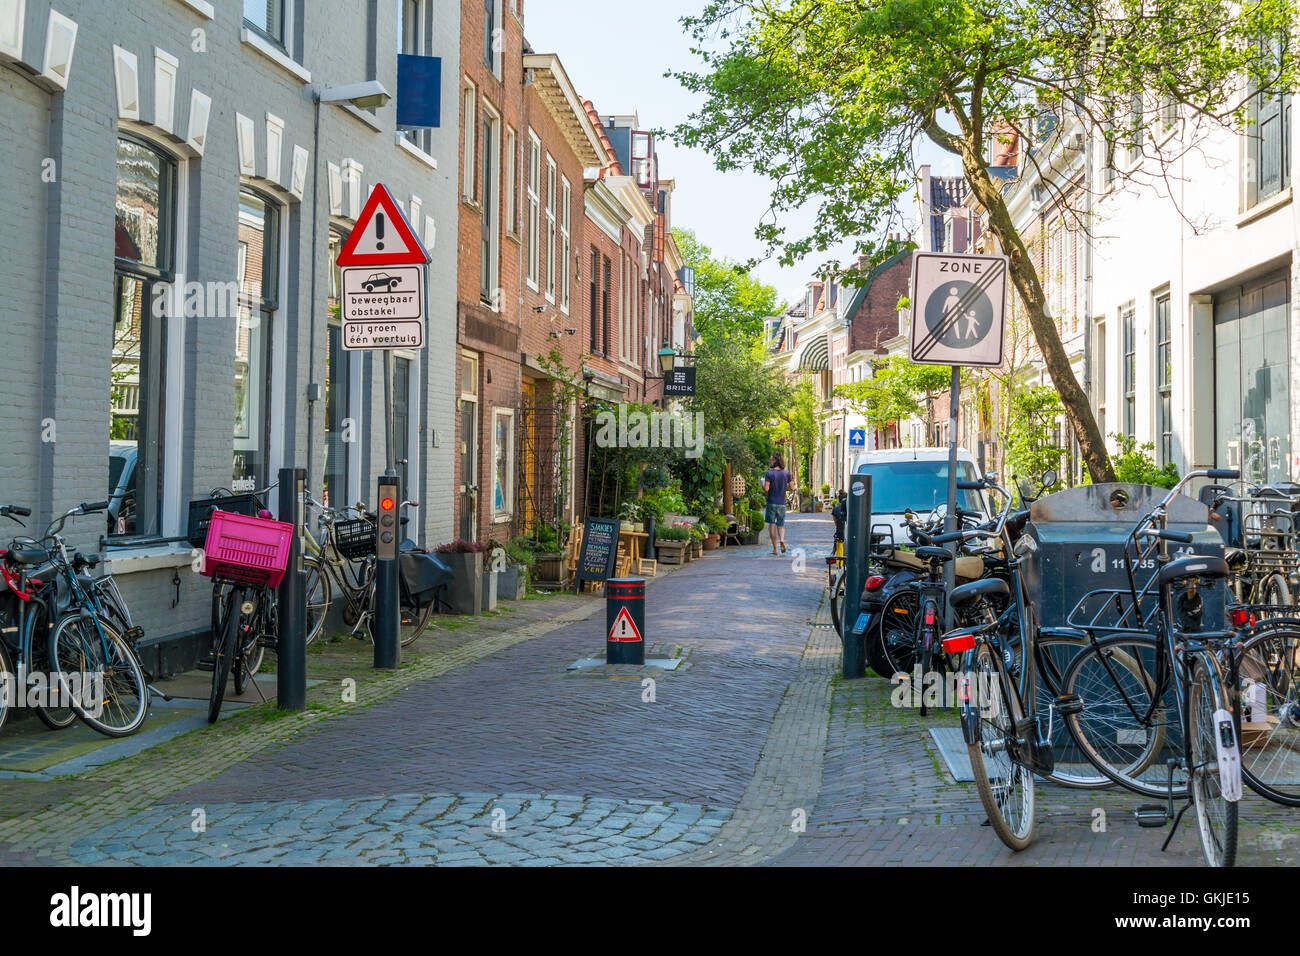 Parked bicycles and flexible bollard for vehicle access control in Breestraat street in city centre of Haarlem, Netherlands Stock Photo